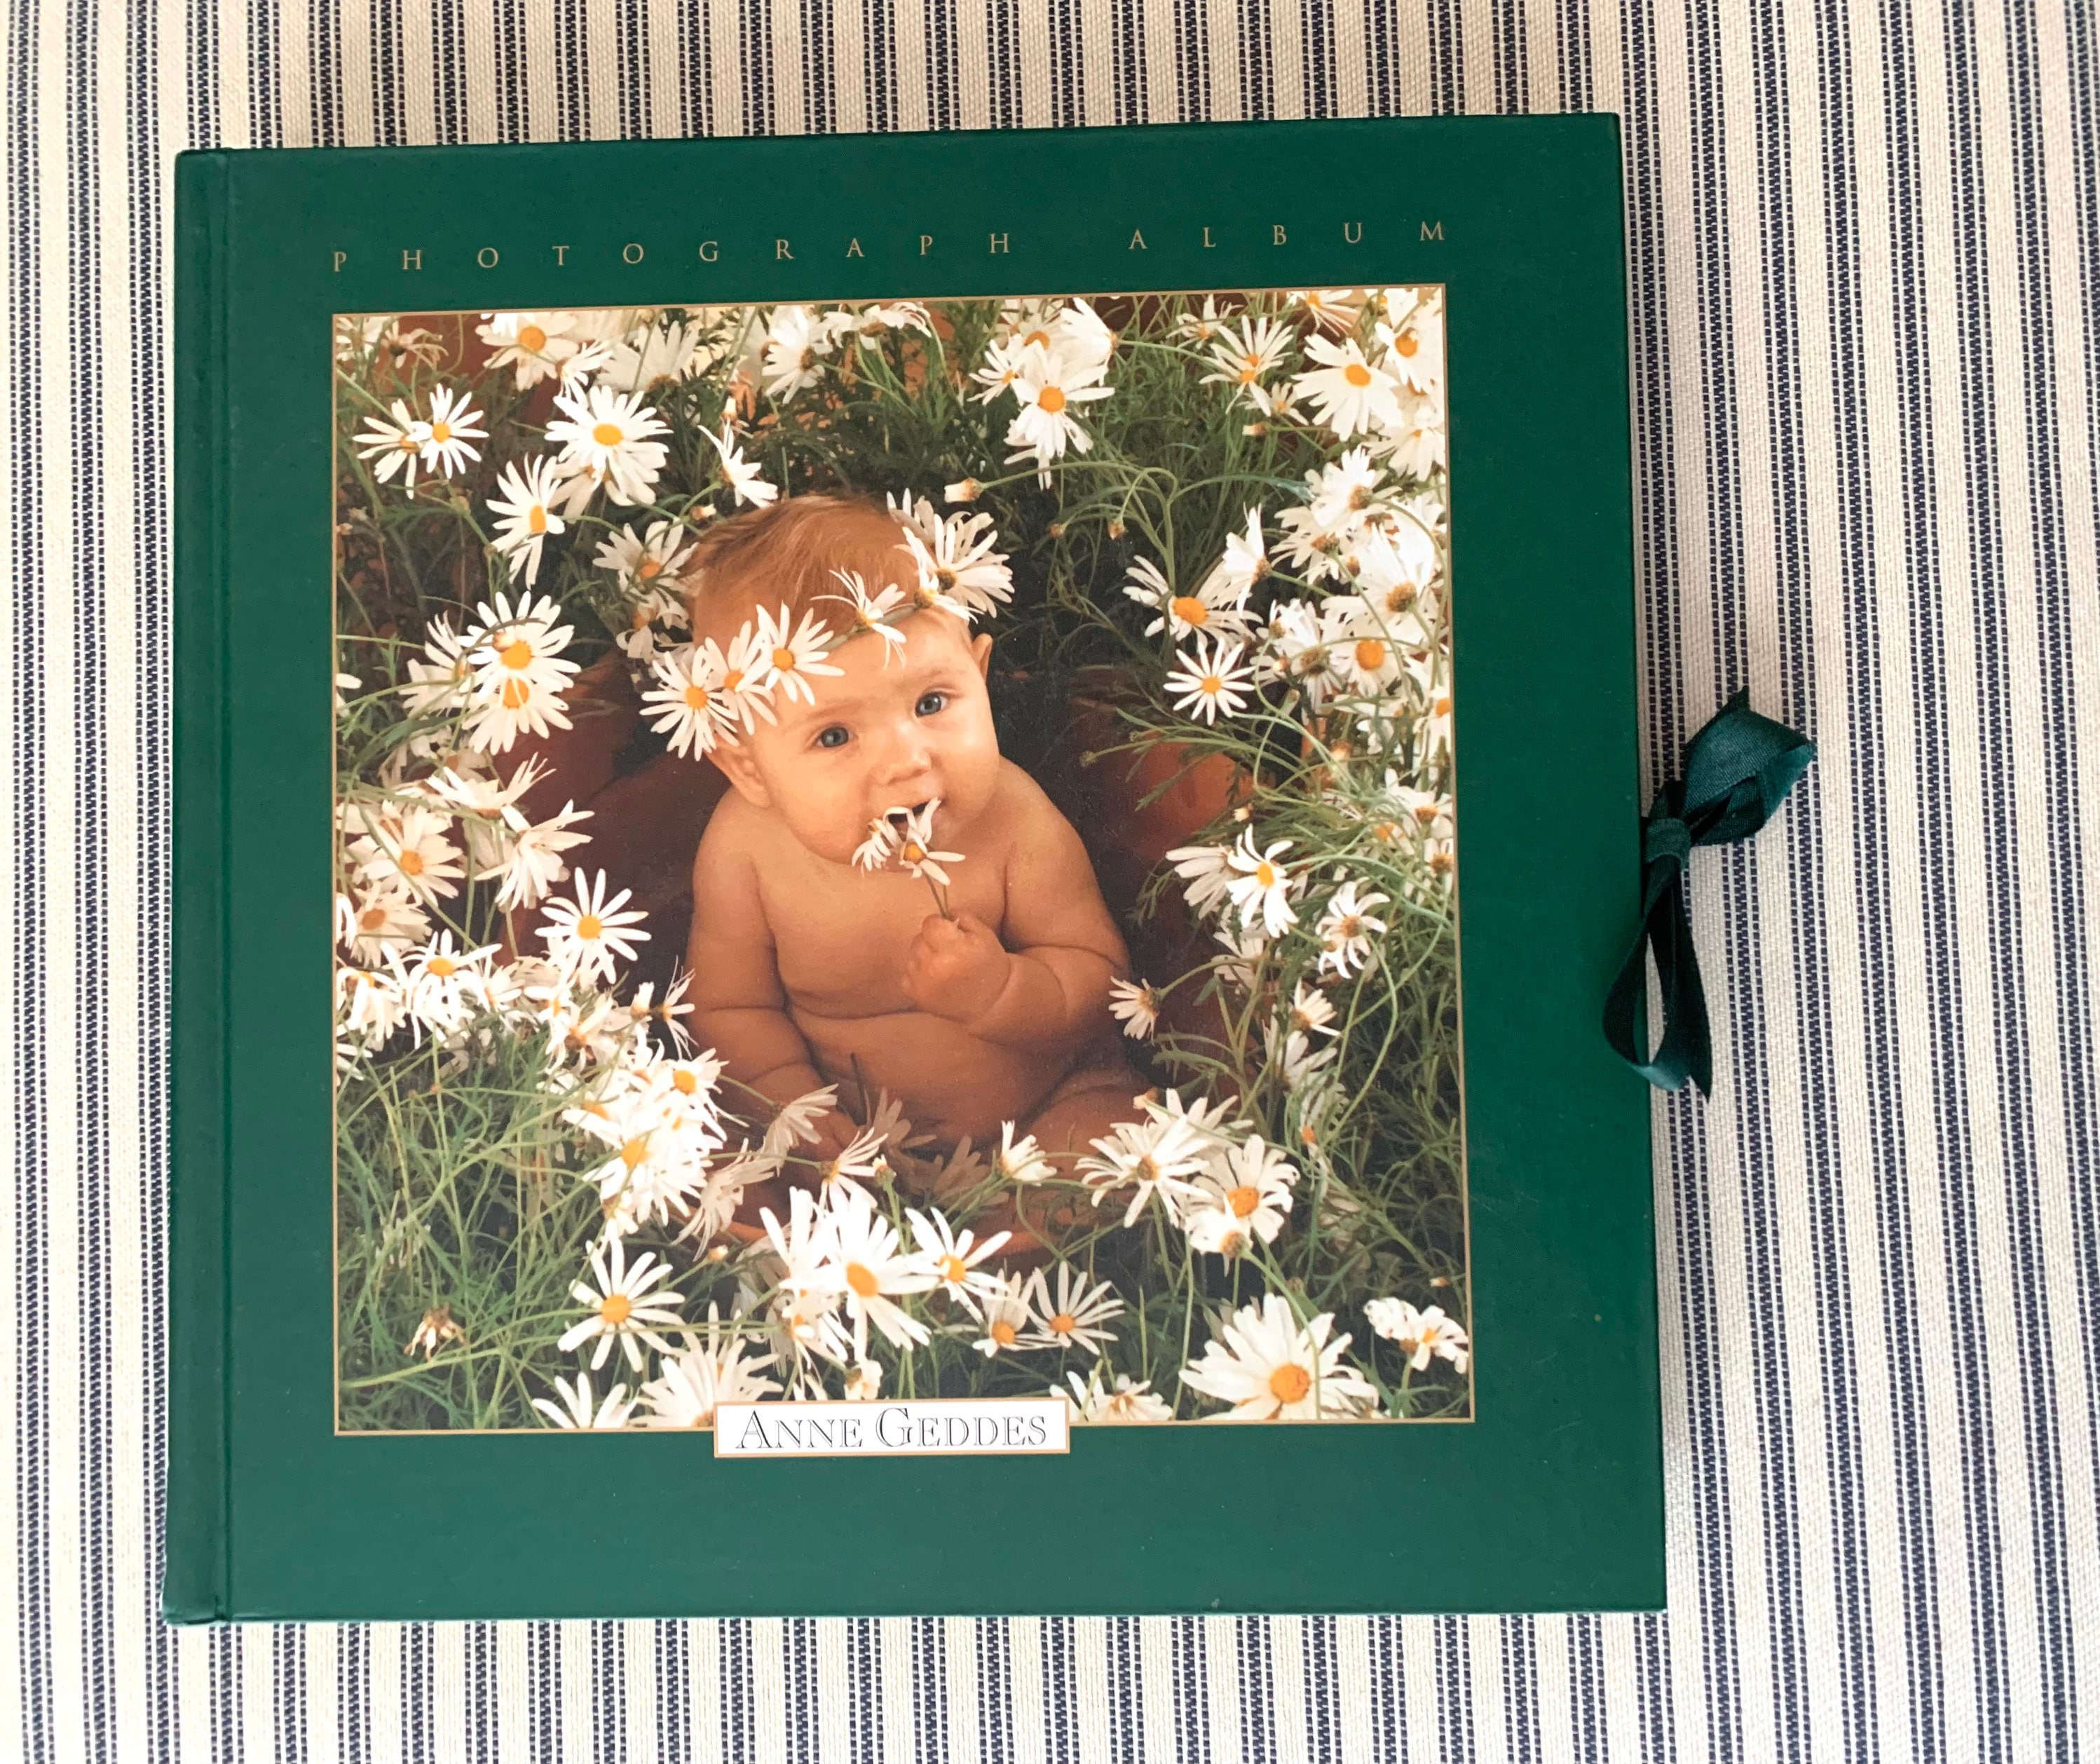 Baby's First Photo Album - Photo Book for Kids